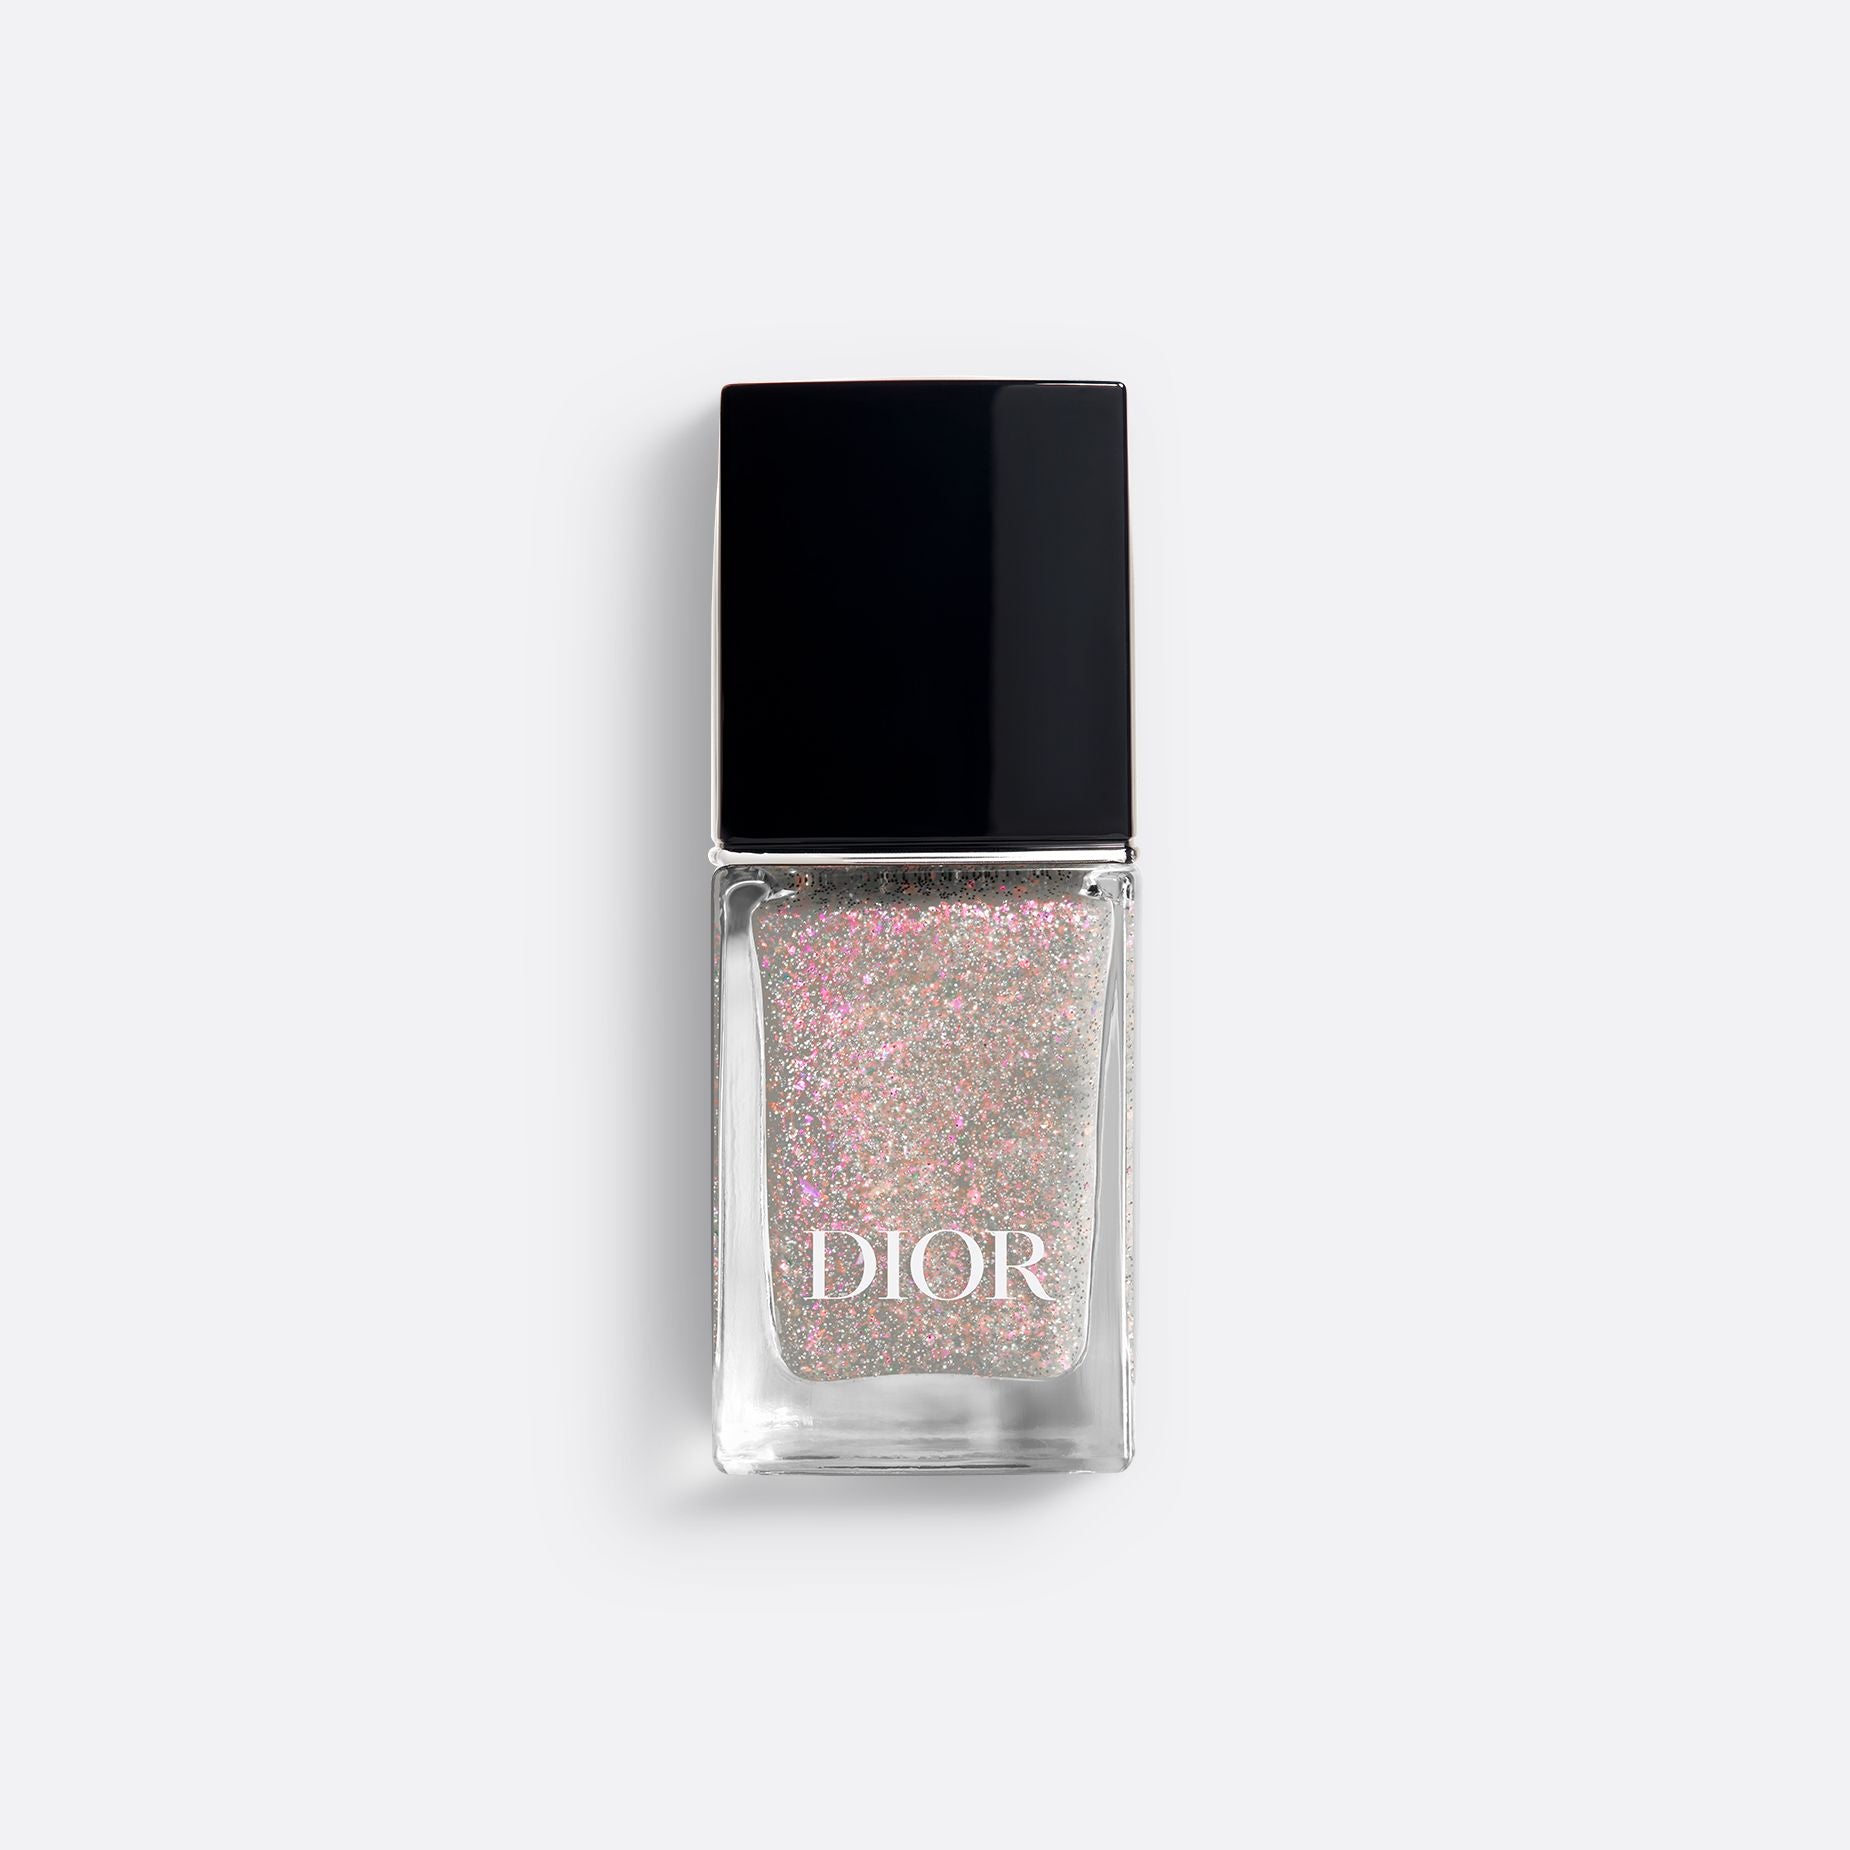 DIOR VERNIS TOP COAT - LIMITED EDITION ~ Glittery Top Coat Lacquer